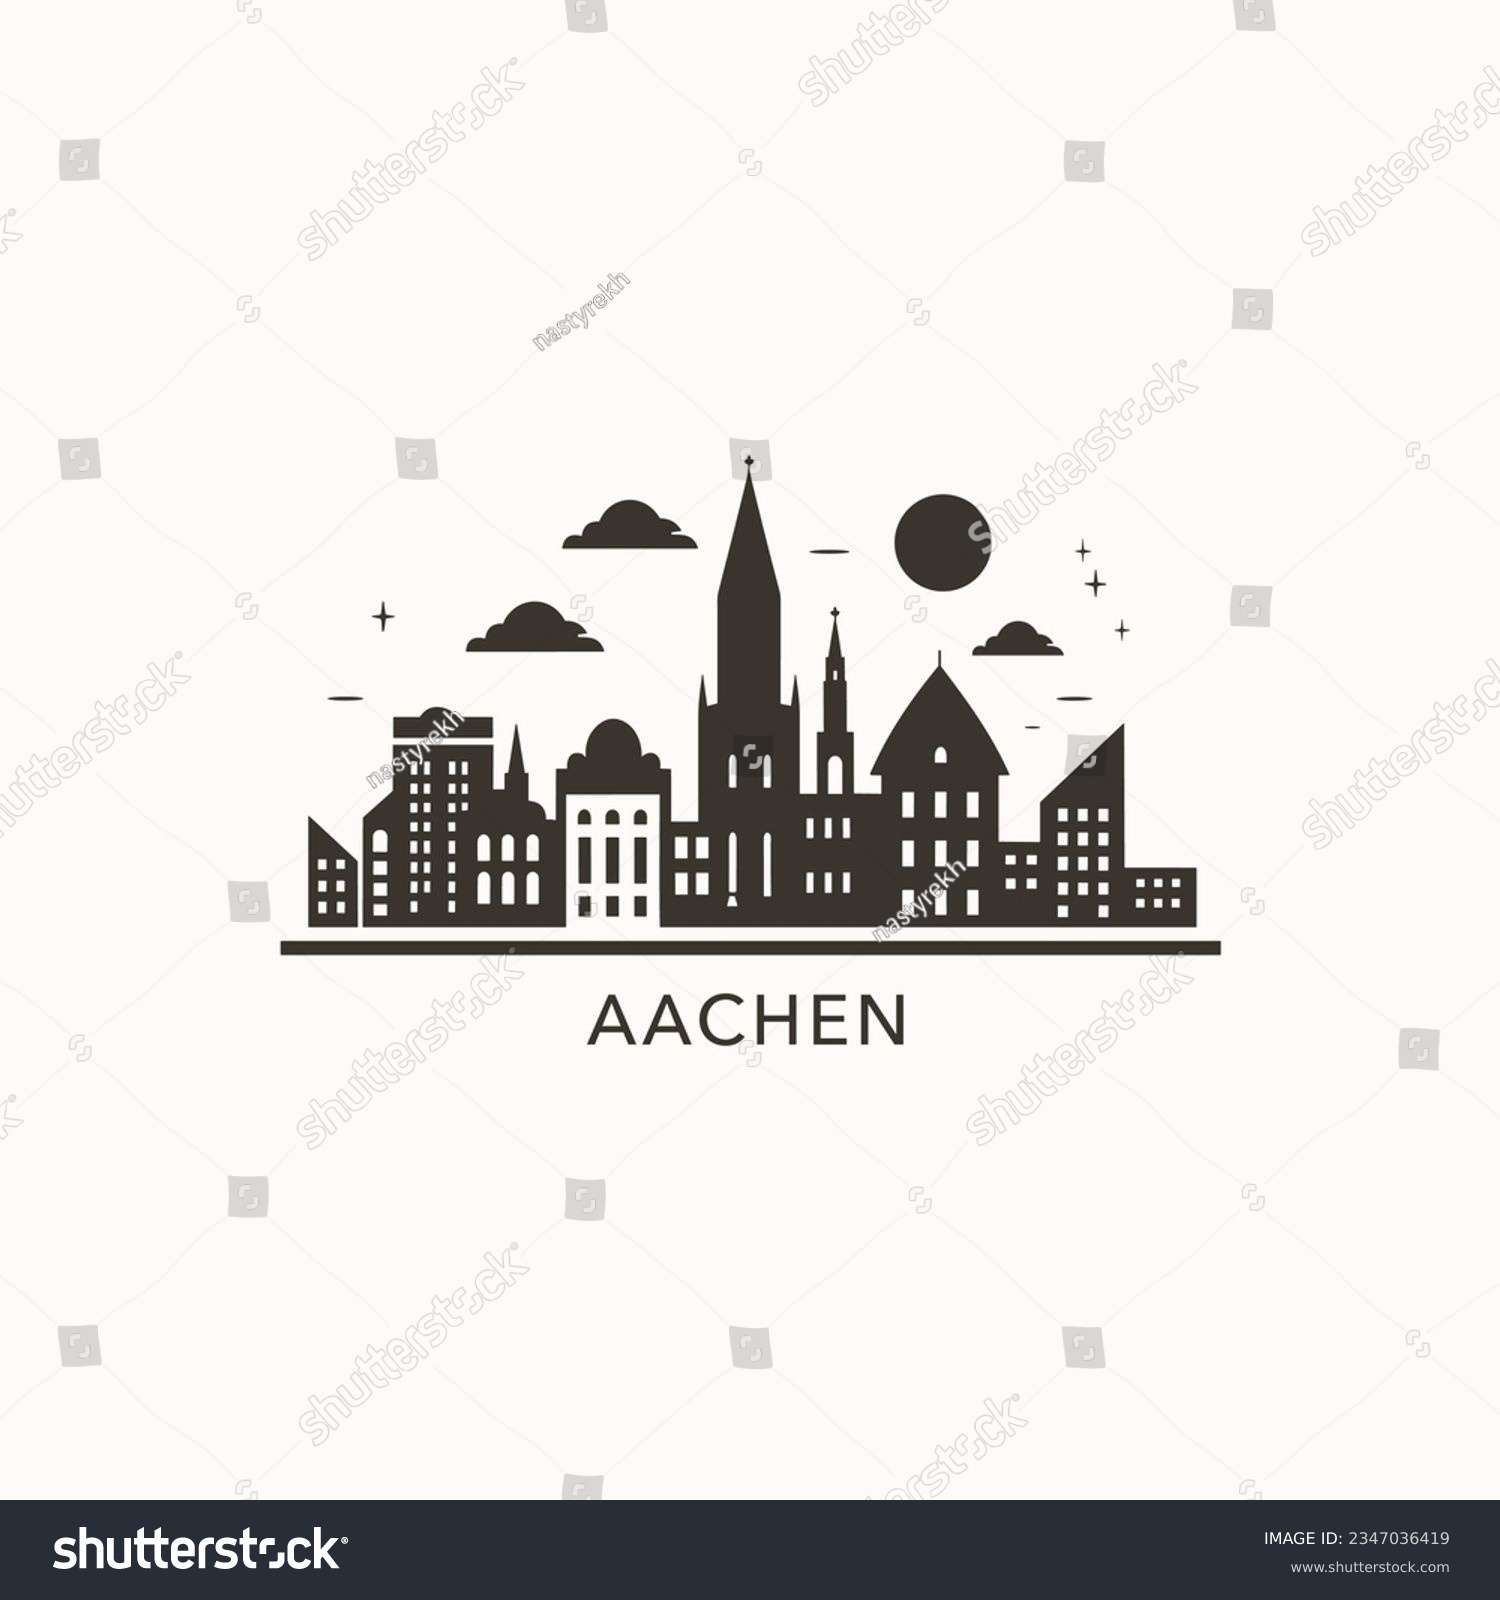 SVG of Germany Aachen cityscape skyline city panorama vector flat modern logo icon. North Rhine-Westphalia emblem idea with landmarks and building silhouettes at night svg